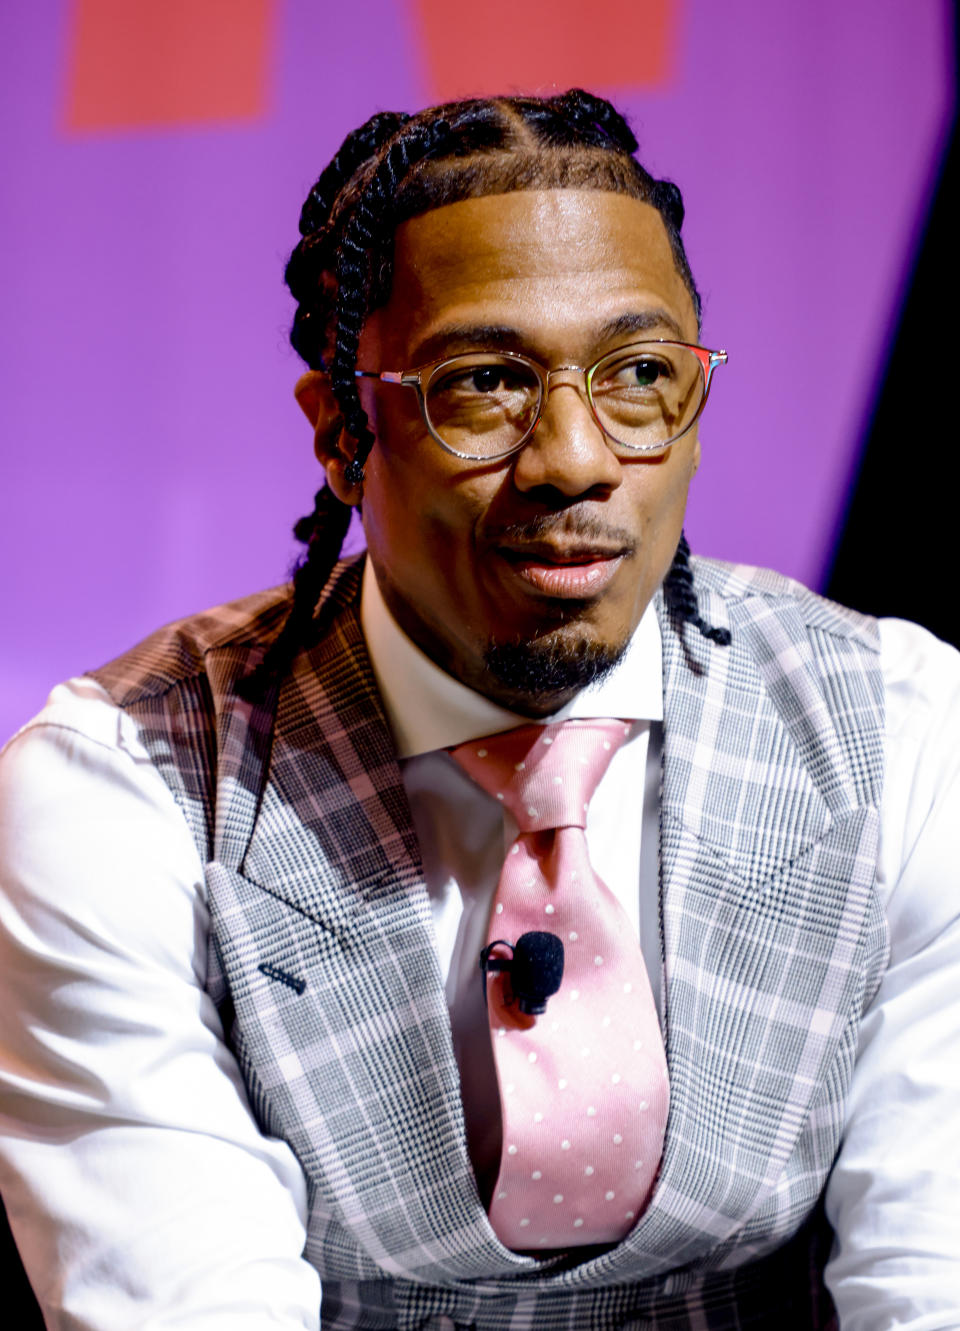 Nick Cannon in a checkered vest and pink polka dot tie speaks at an event